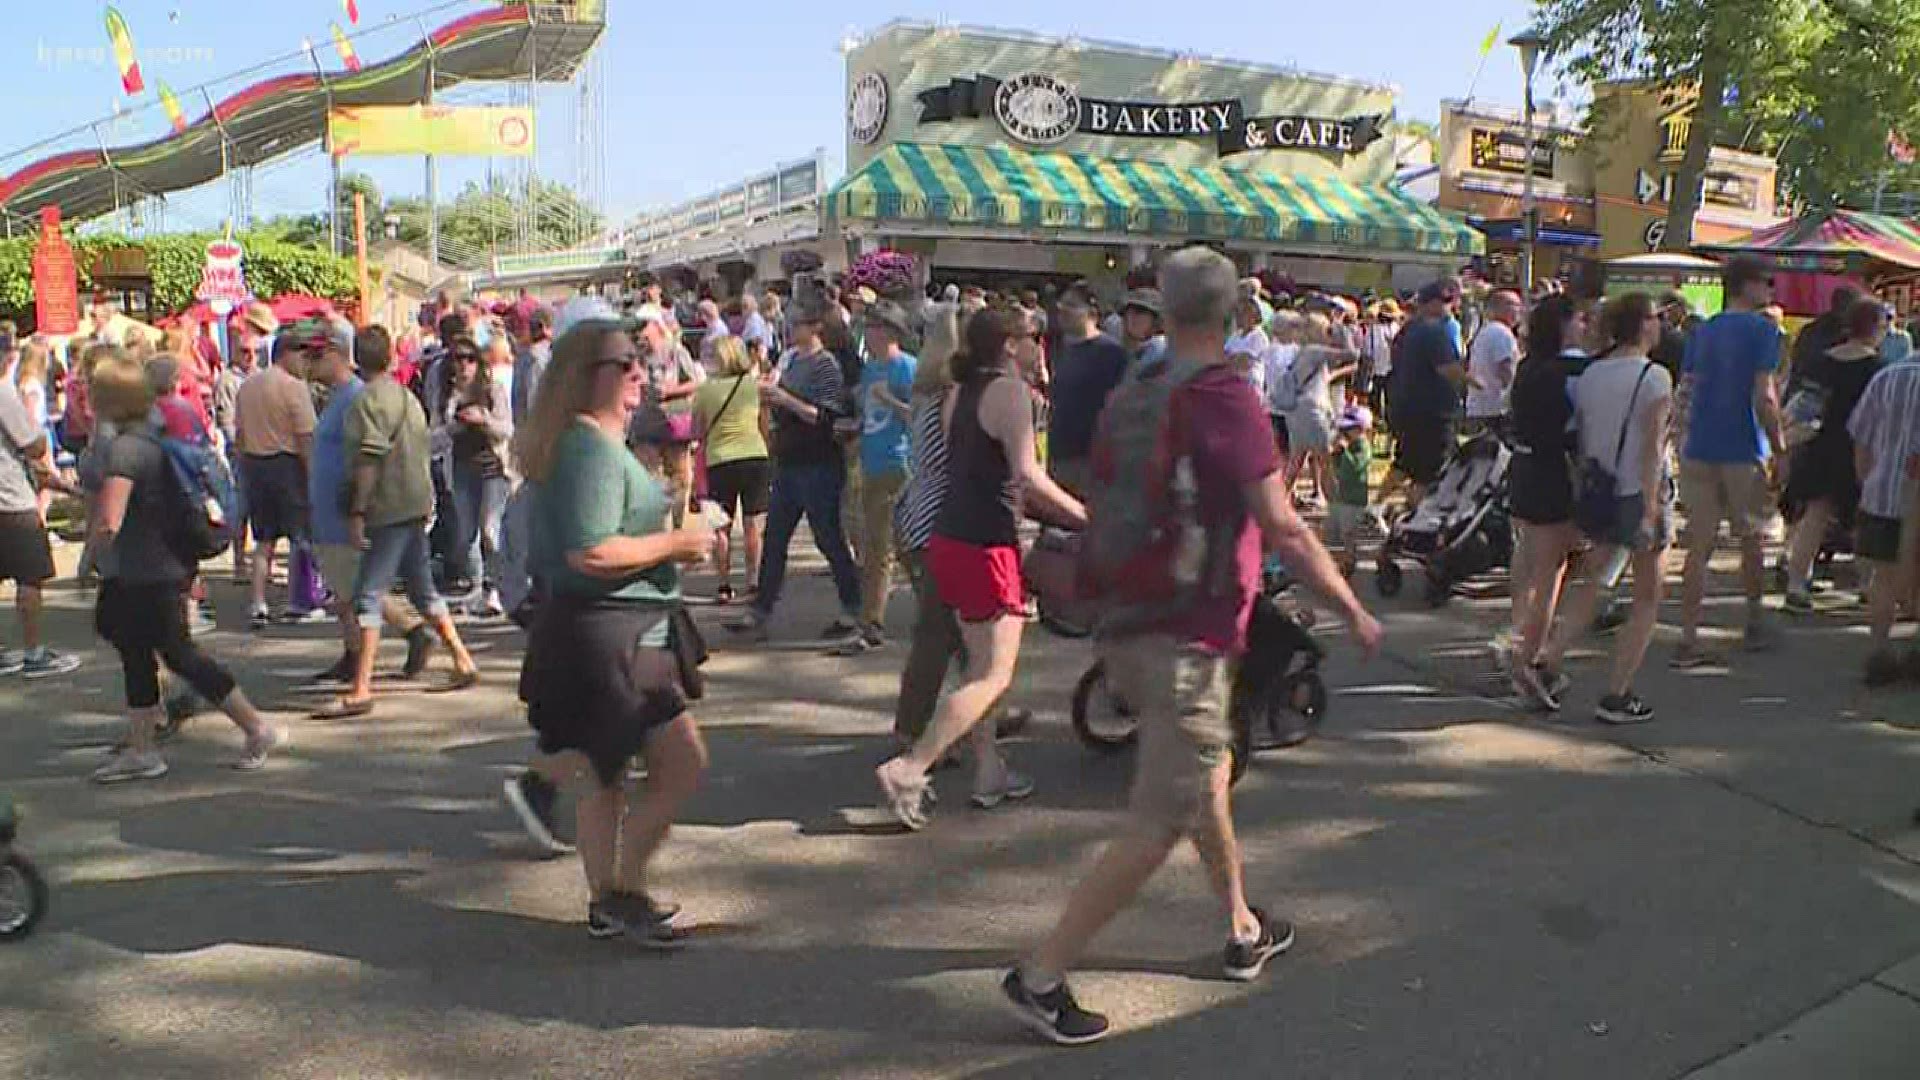 The MN State Agricultural Society Board voted to cancel the 2020 Minnesota State Fair due to the coronavirus pandemic.